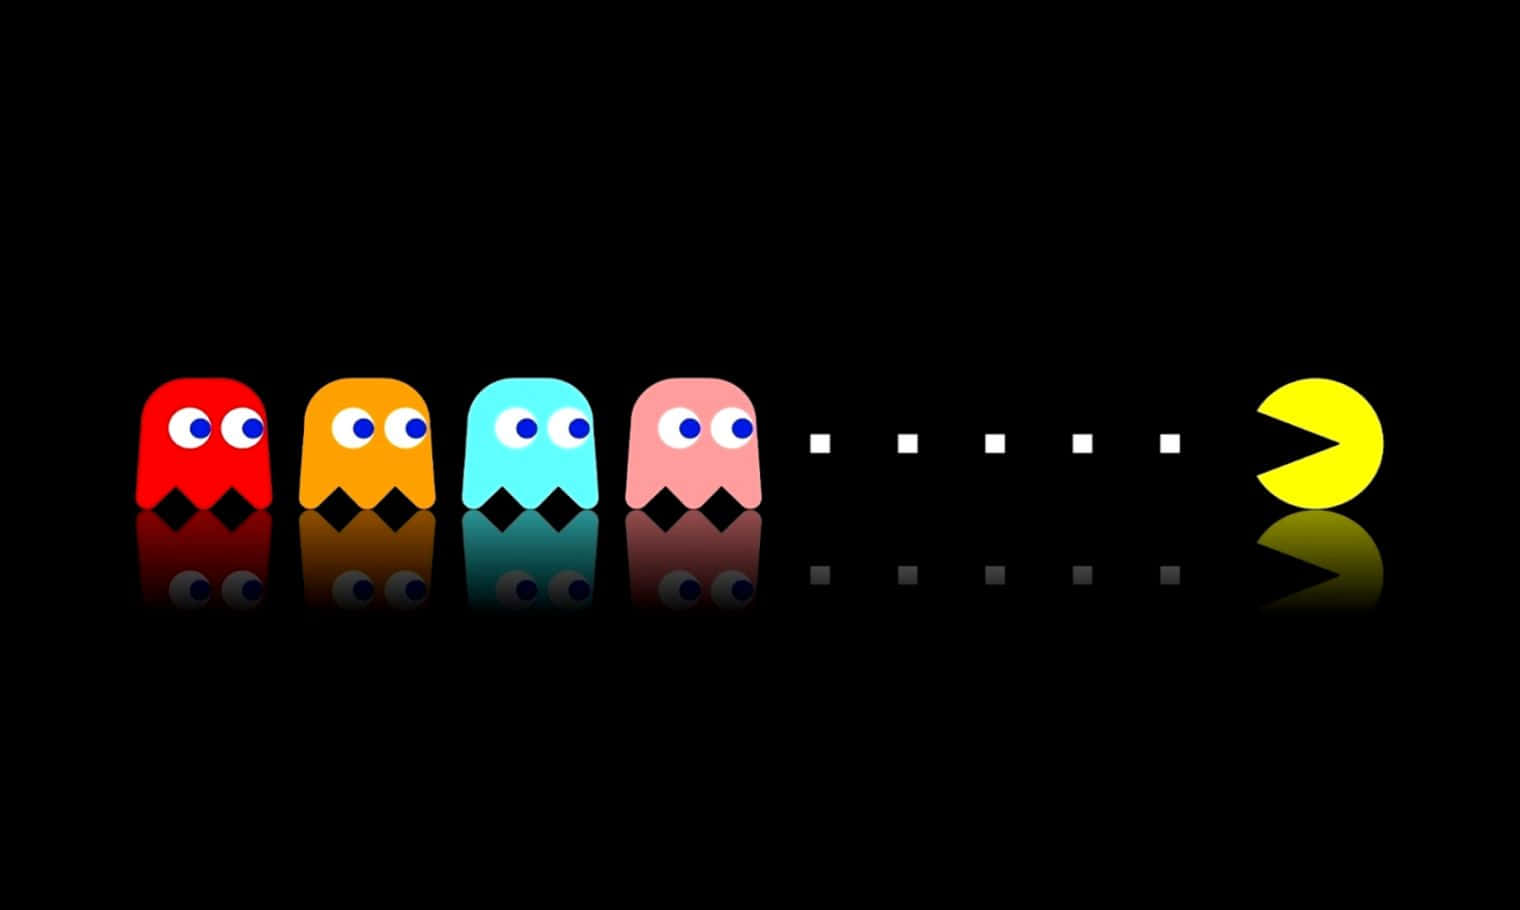 Classic Pac-Man Game in Action